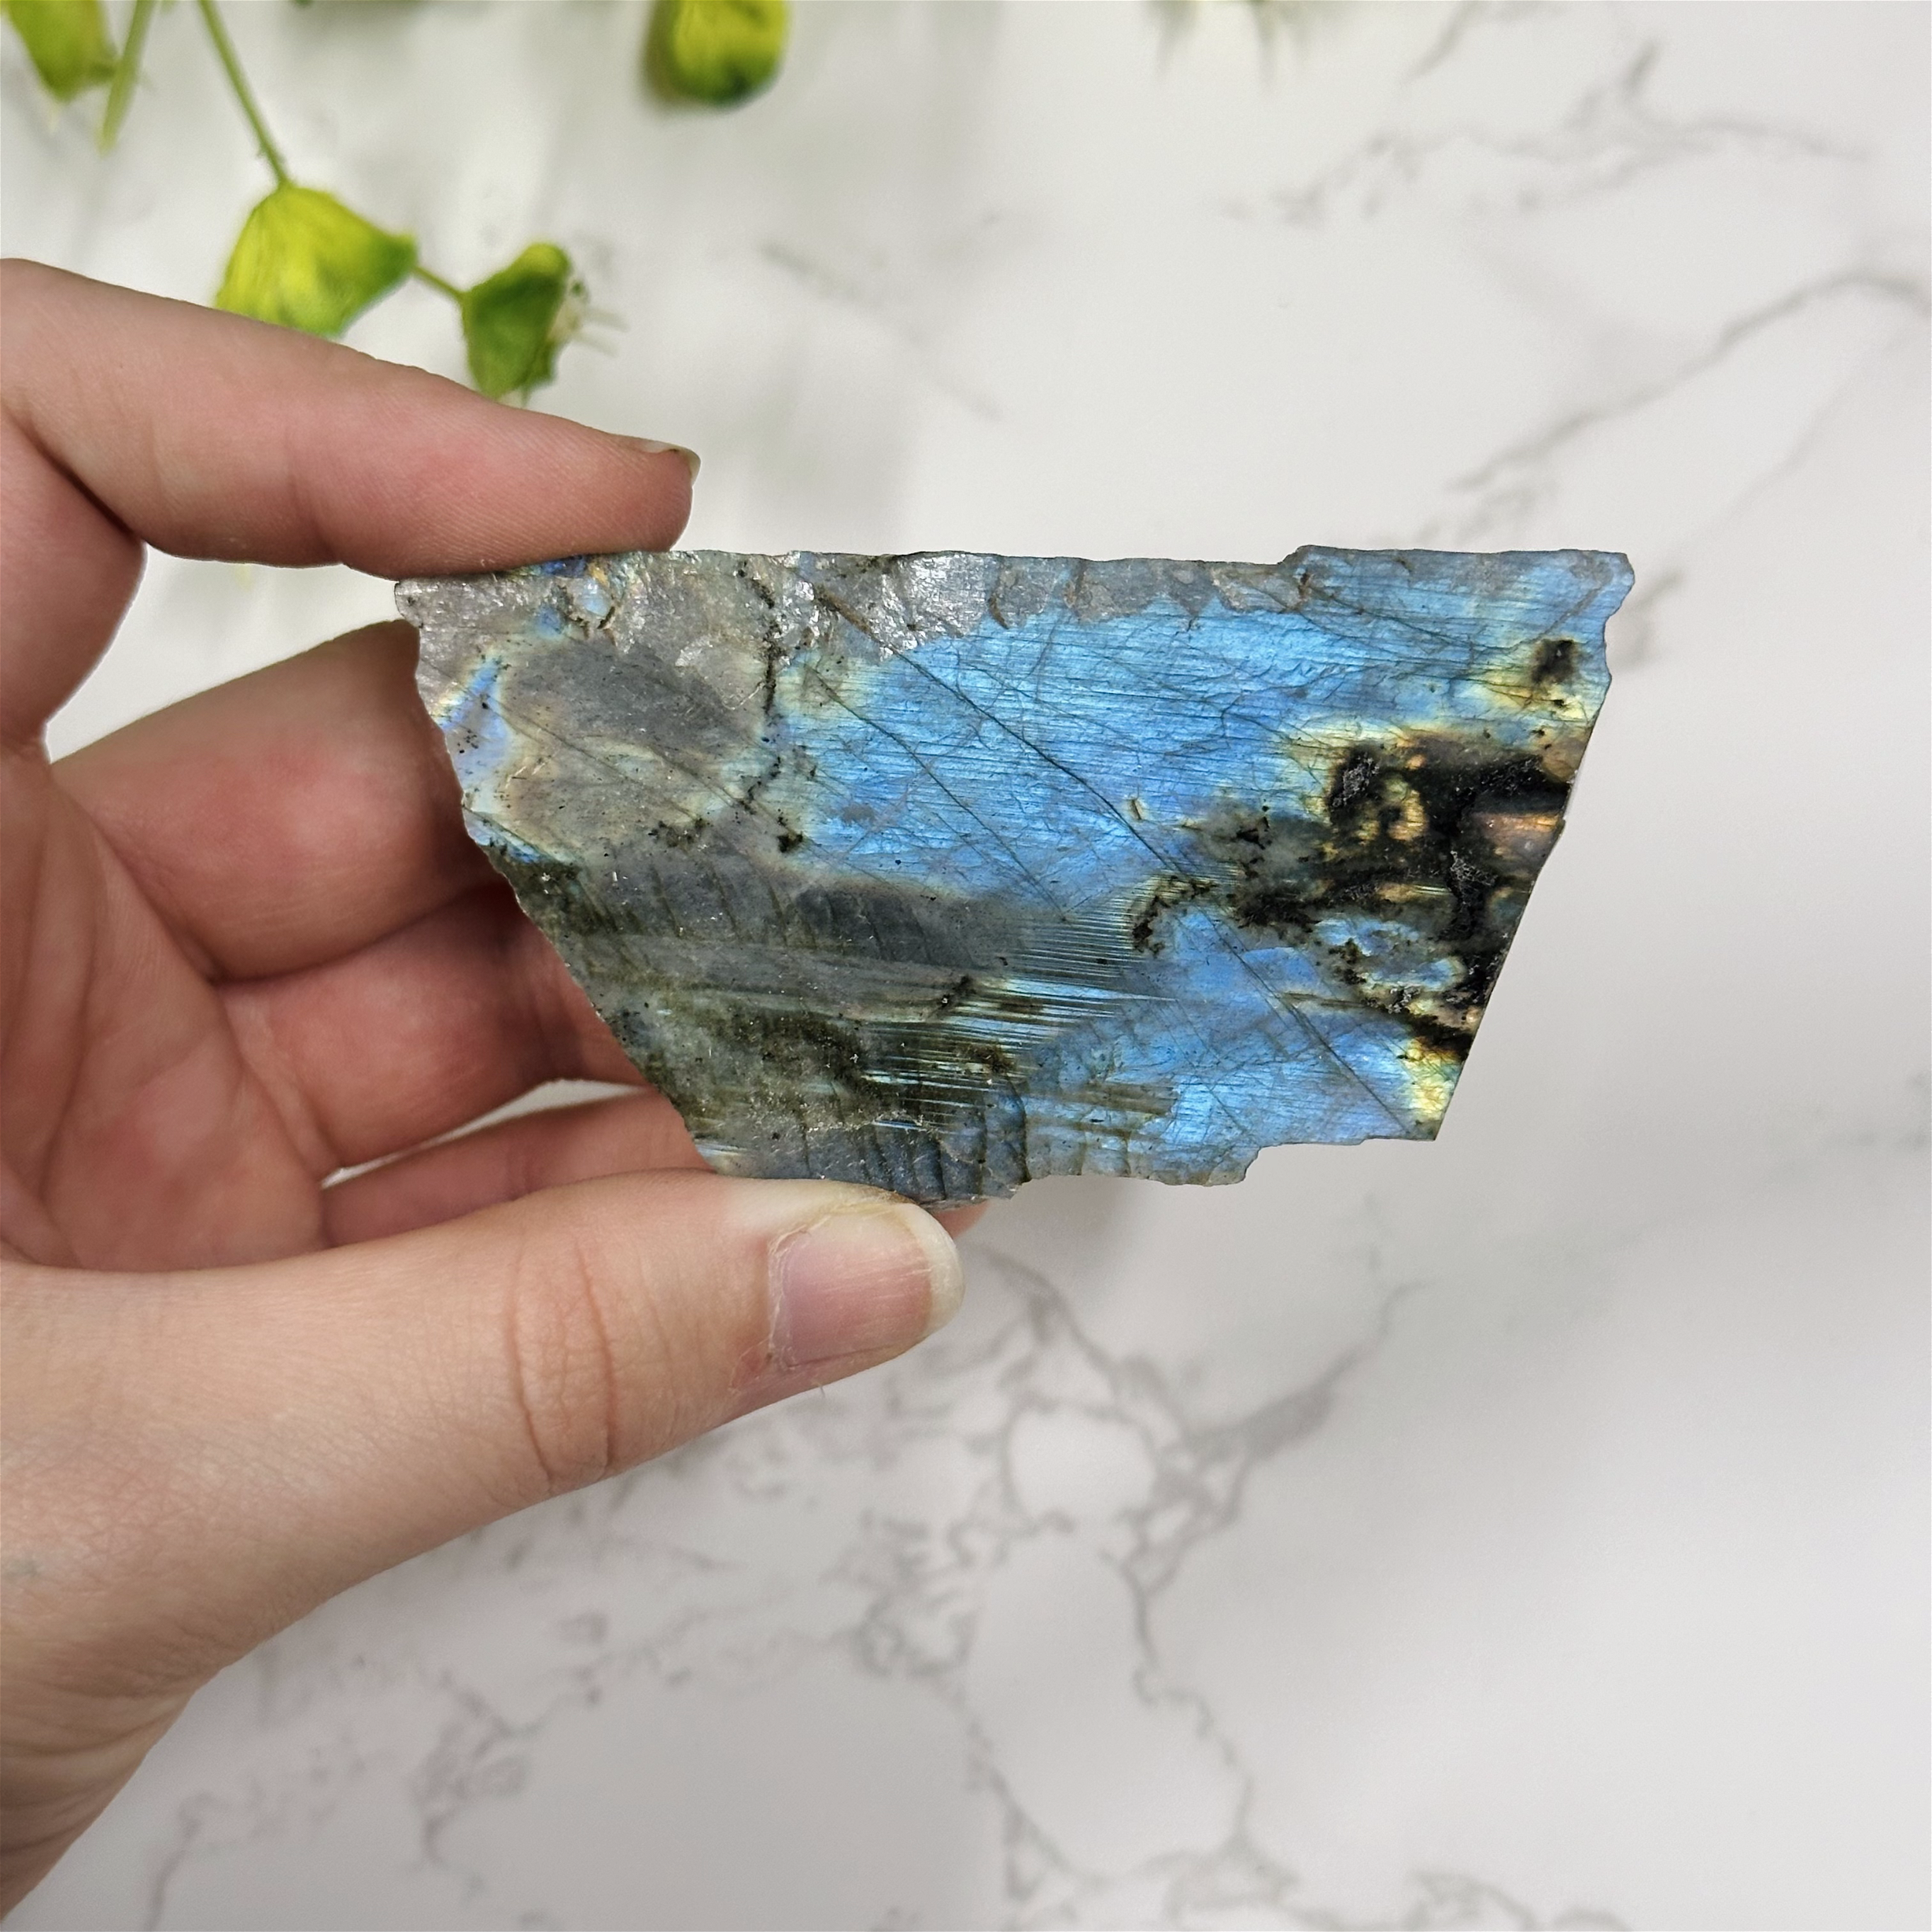 Labradorite Specimen with Natural Edge and Heart Shaped Inclusion (Free Stand with Purchase)